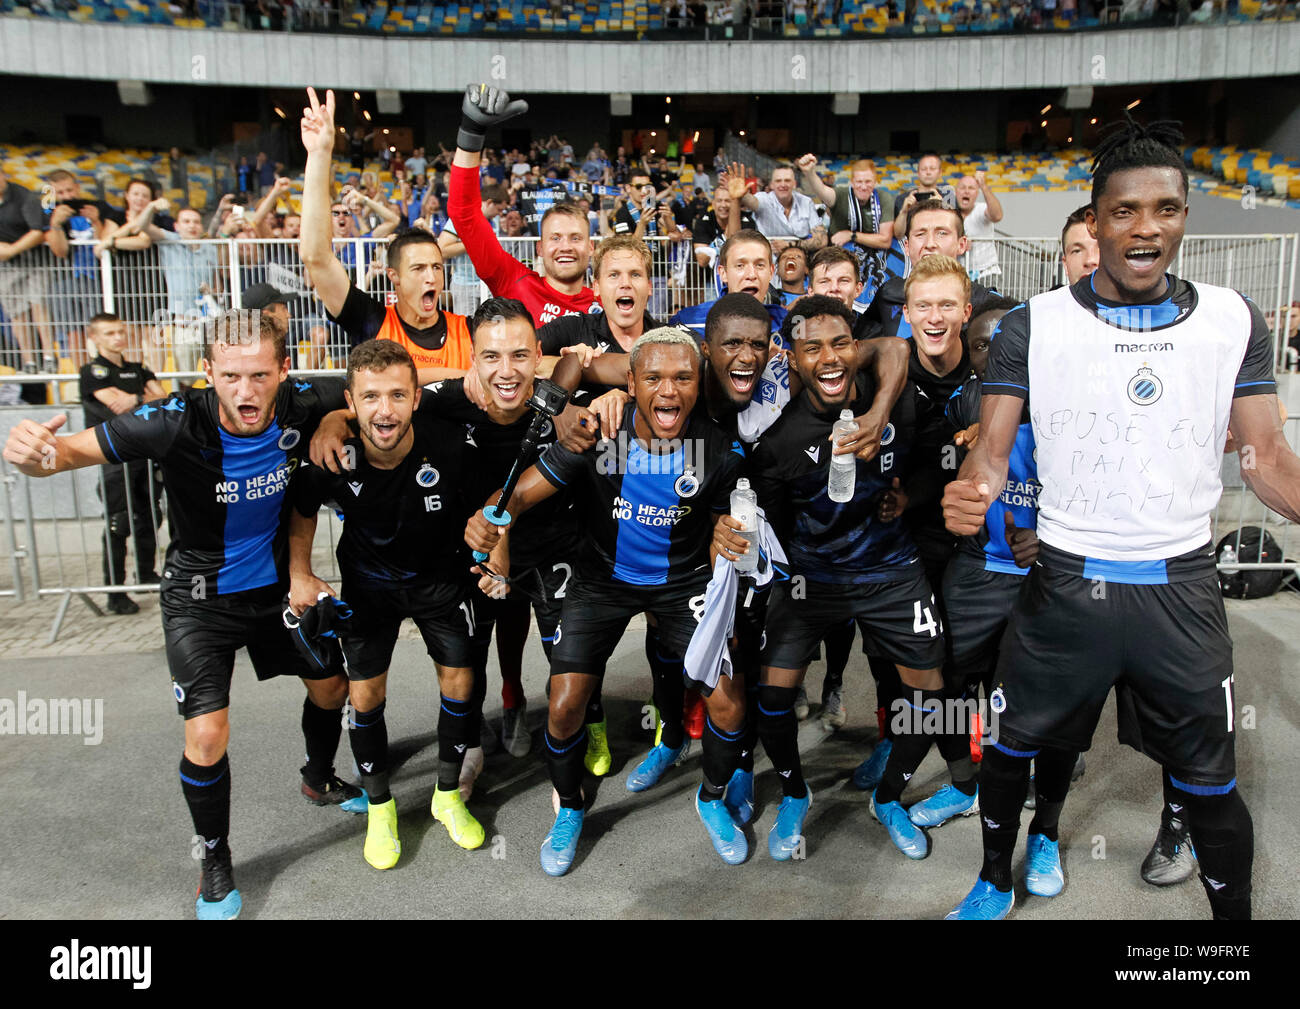 Fans club brugge hi-res stock photography and images - Alamy